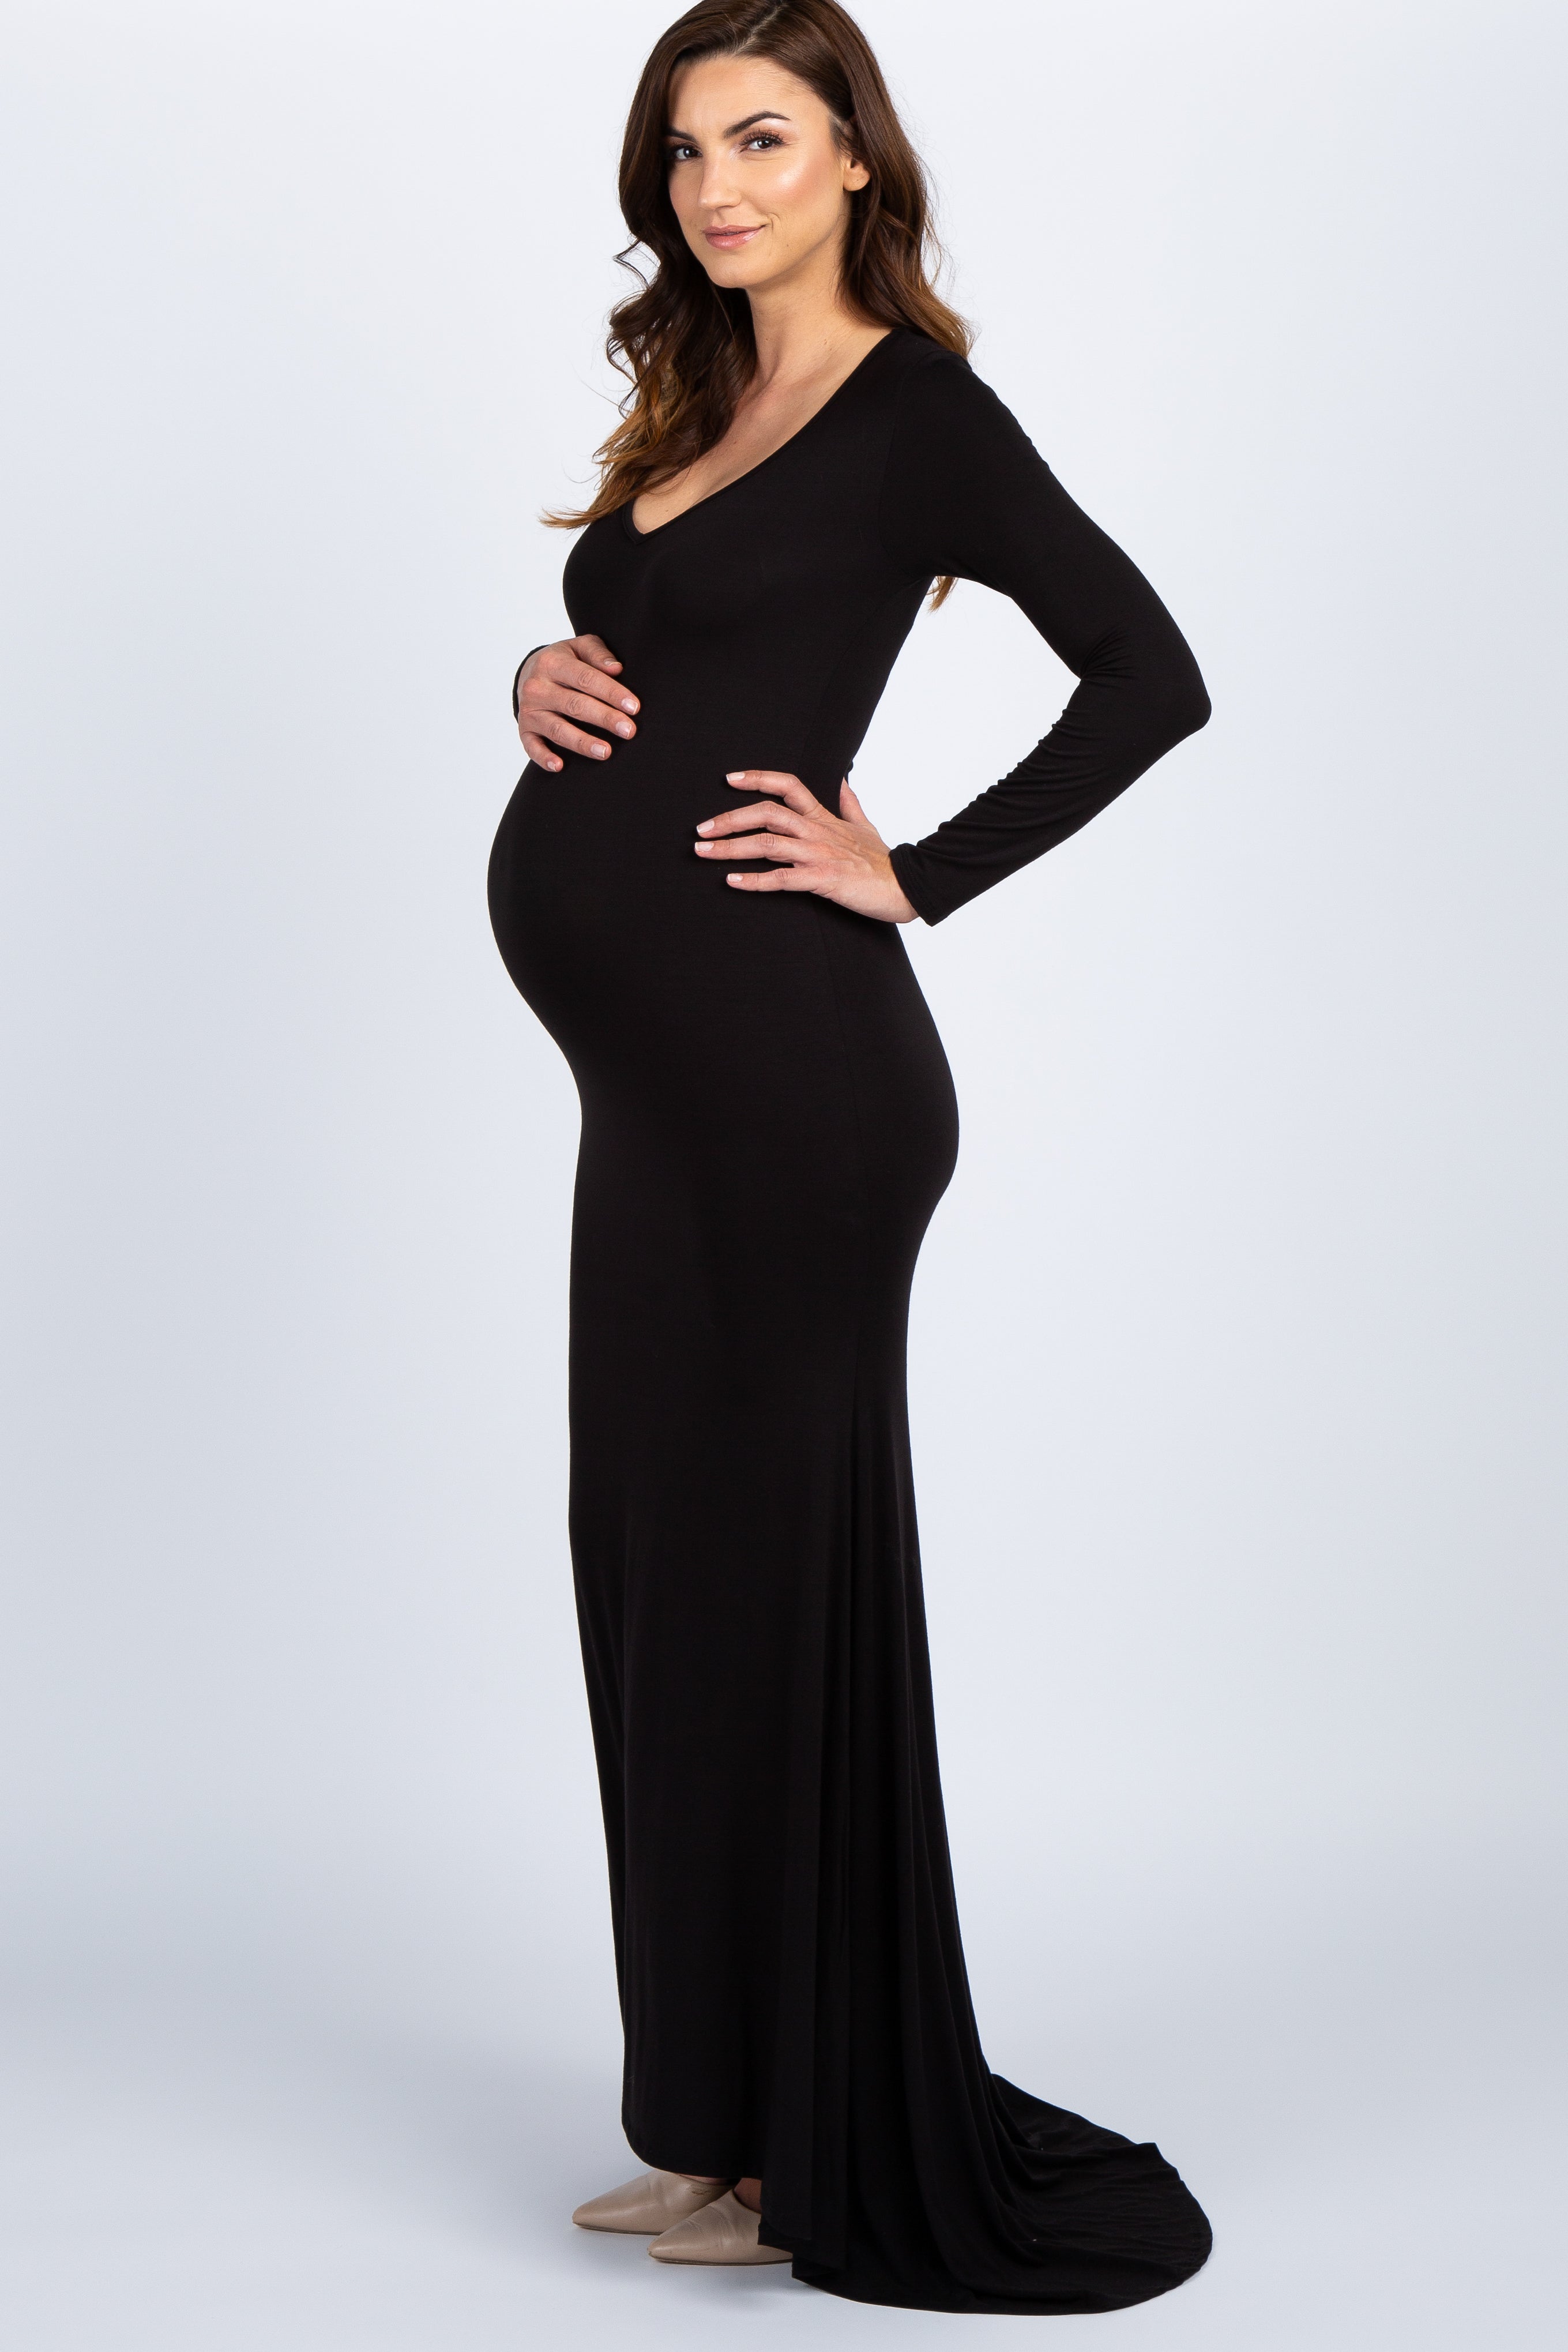 Fabienne bell sleeve maternity dress - Miss Madison Boutique Maternity, Pregnancy  Gowns, Dresses for Photography, Photoshoot, Bridesmaid, Babyshower